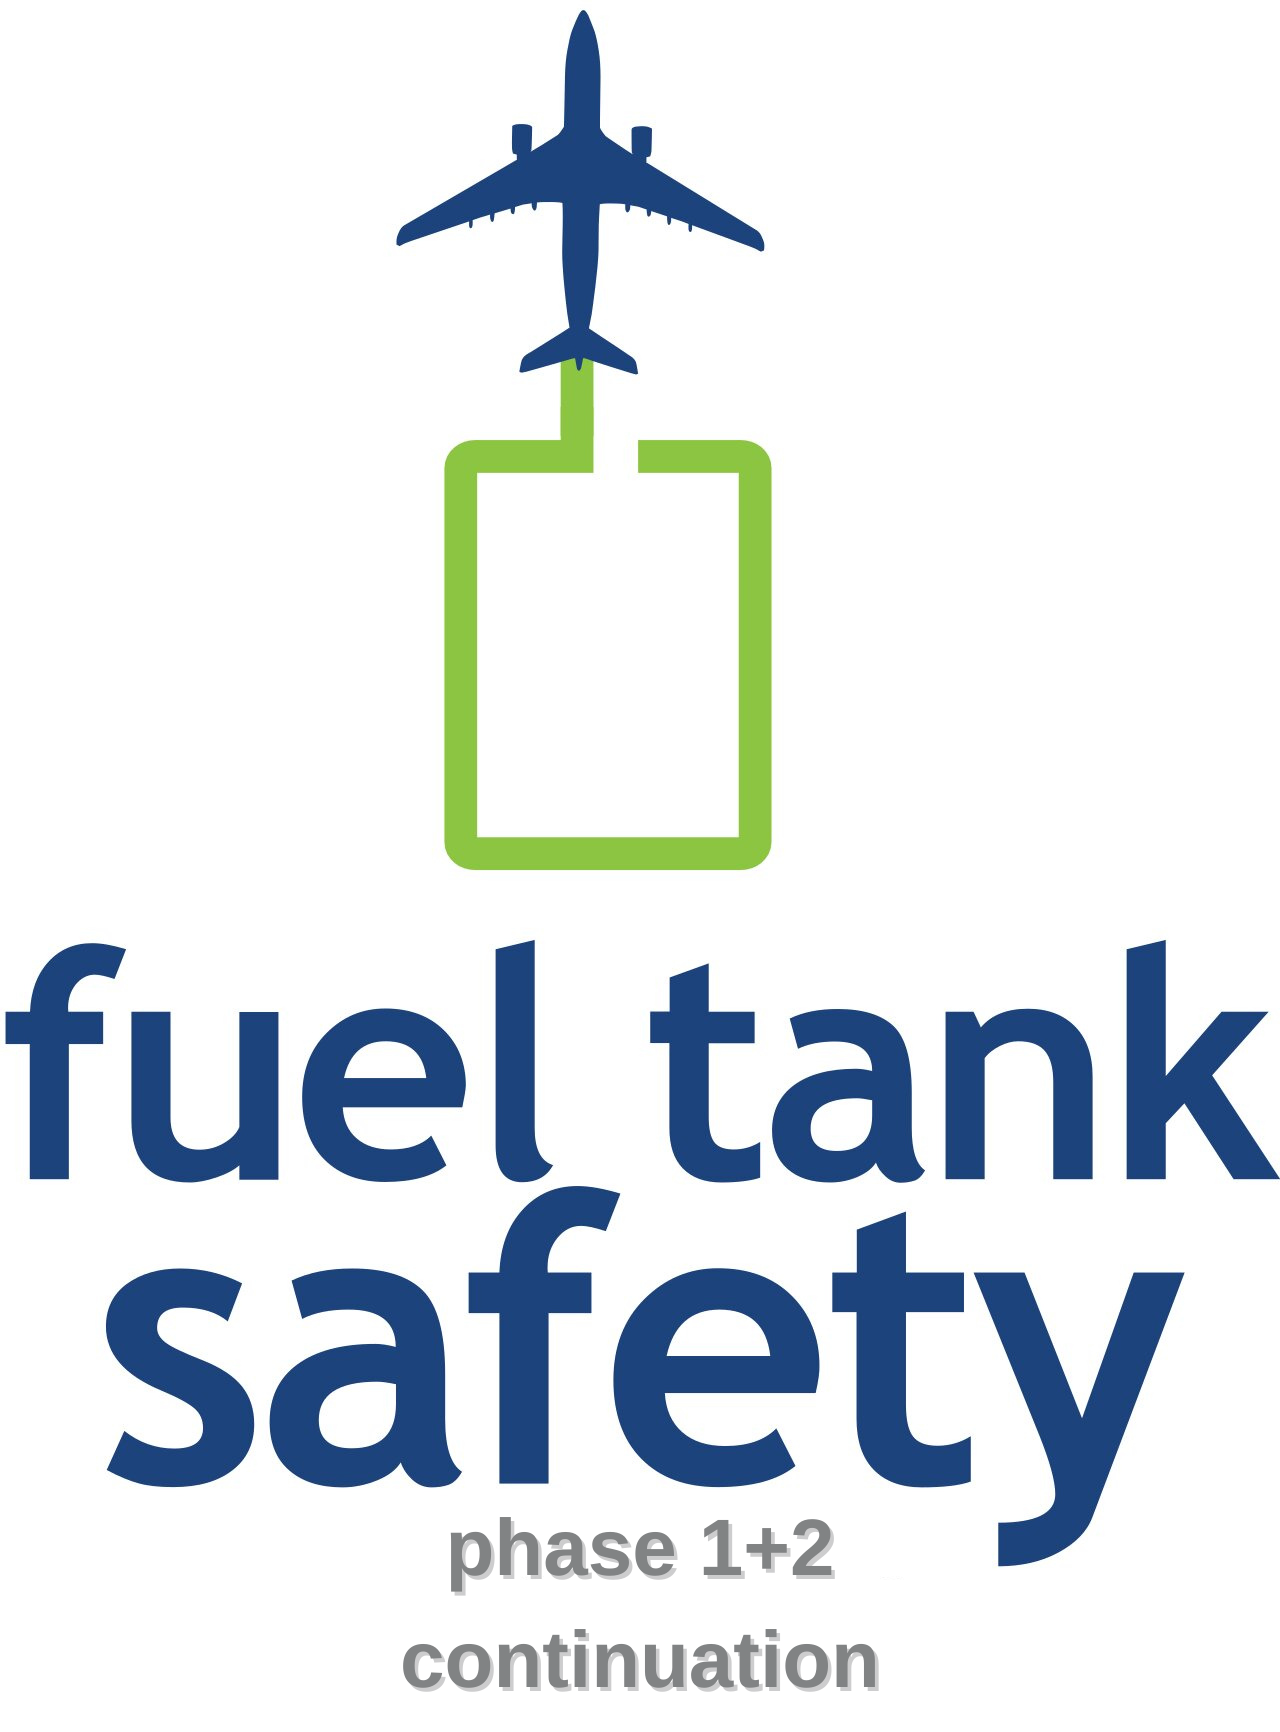 Fuel Tank Safety Phase 1+2 Continuation